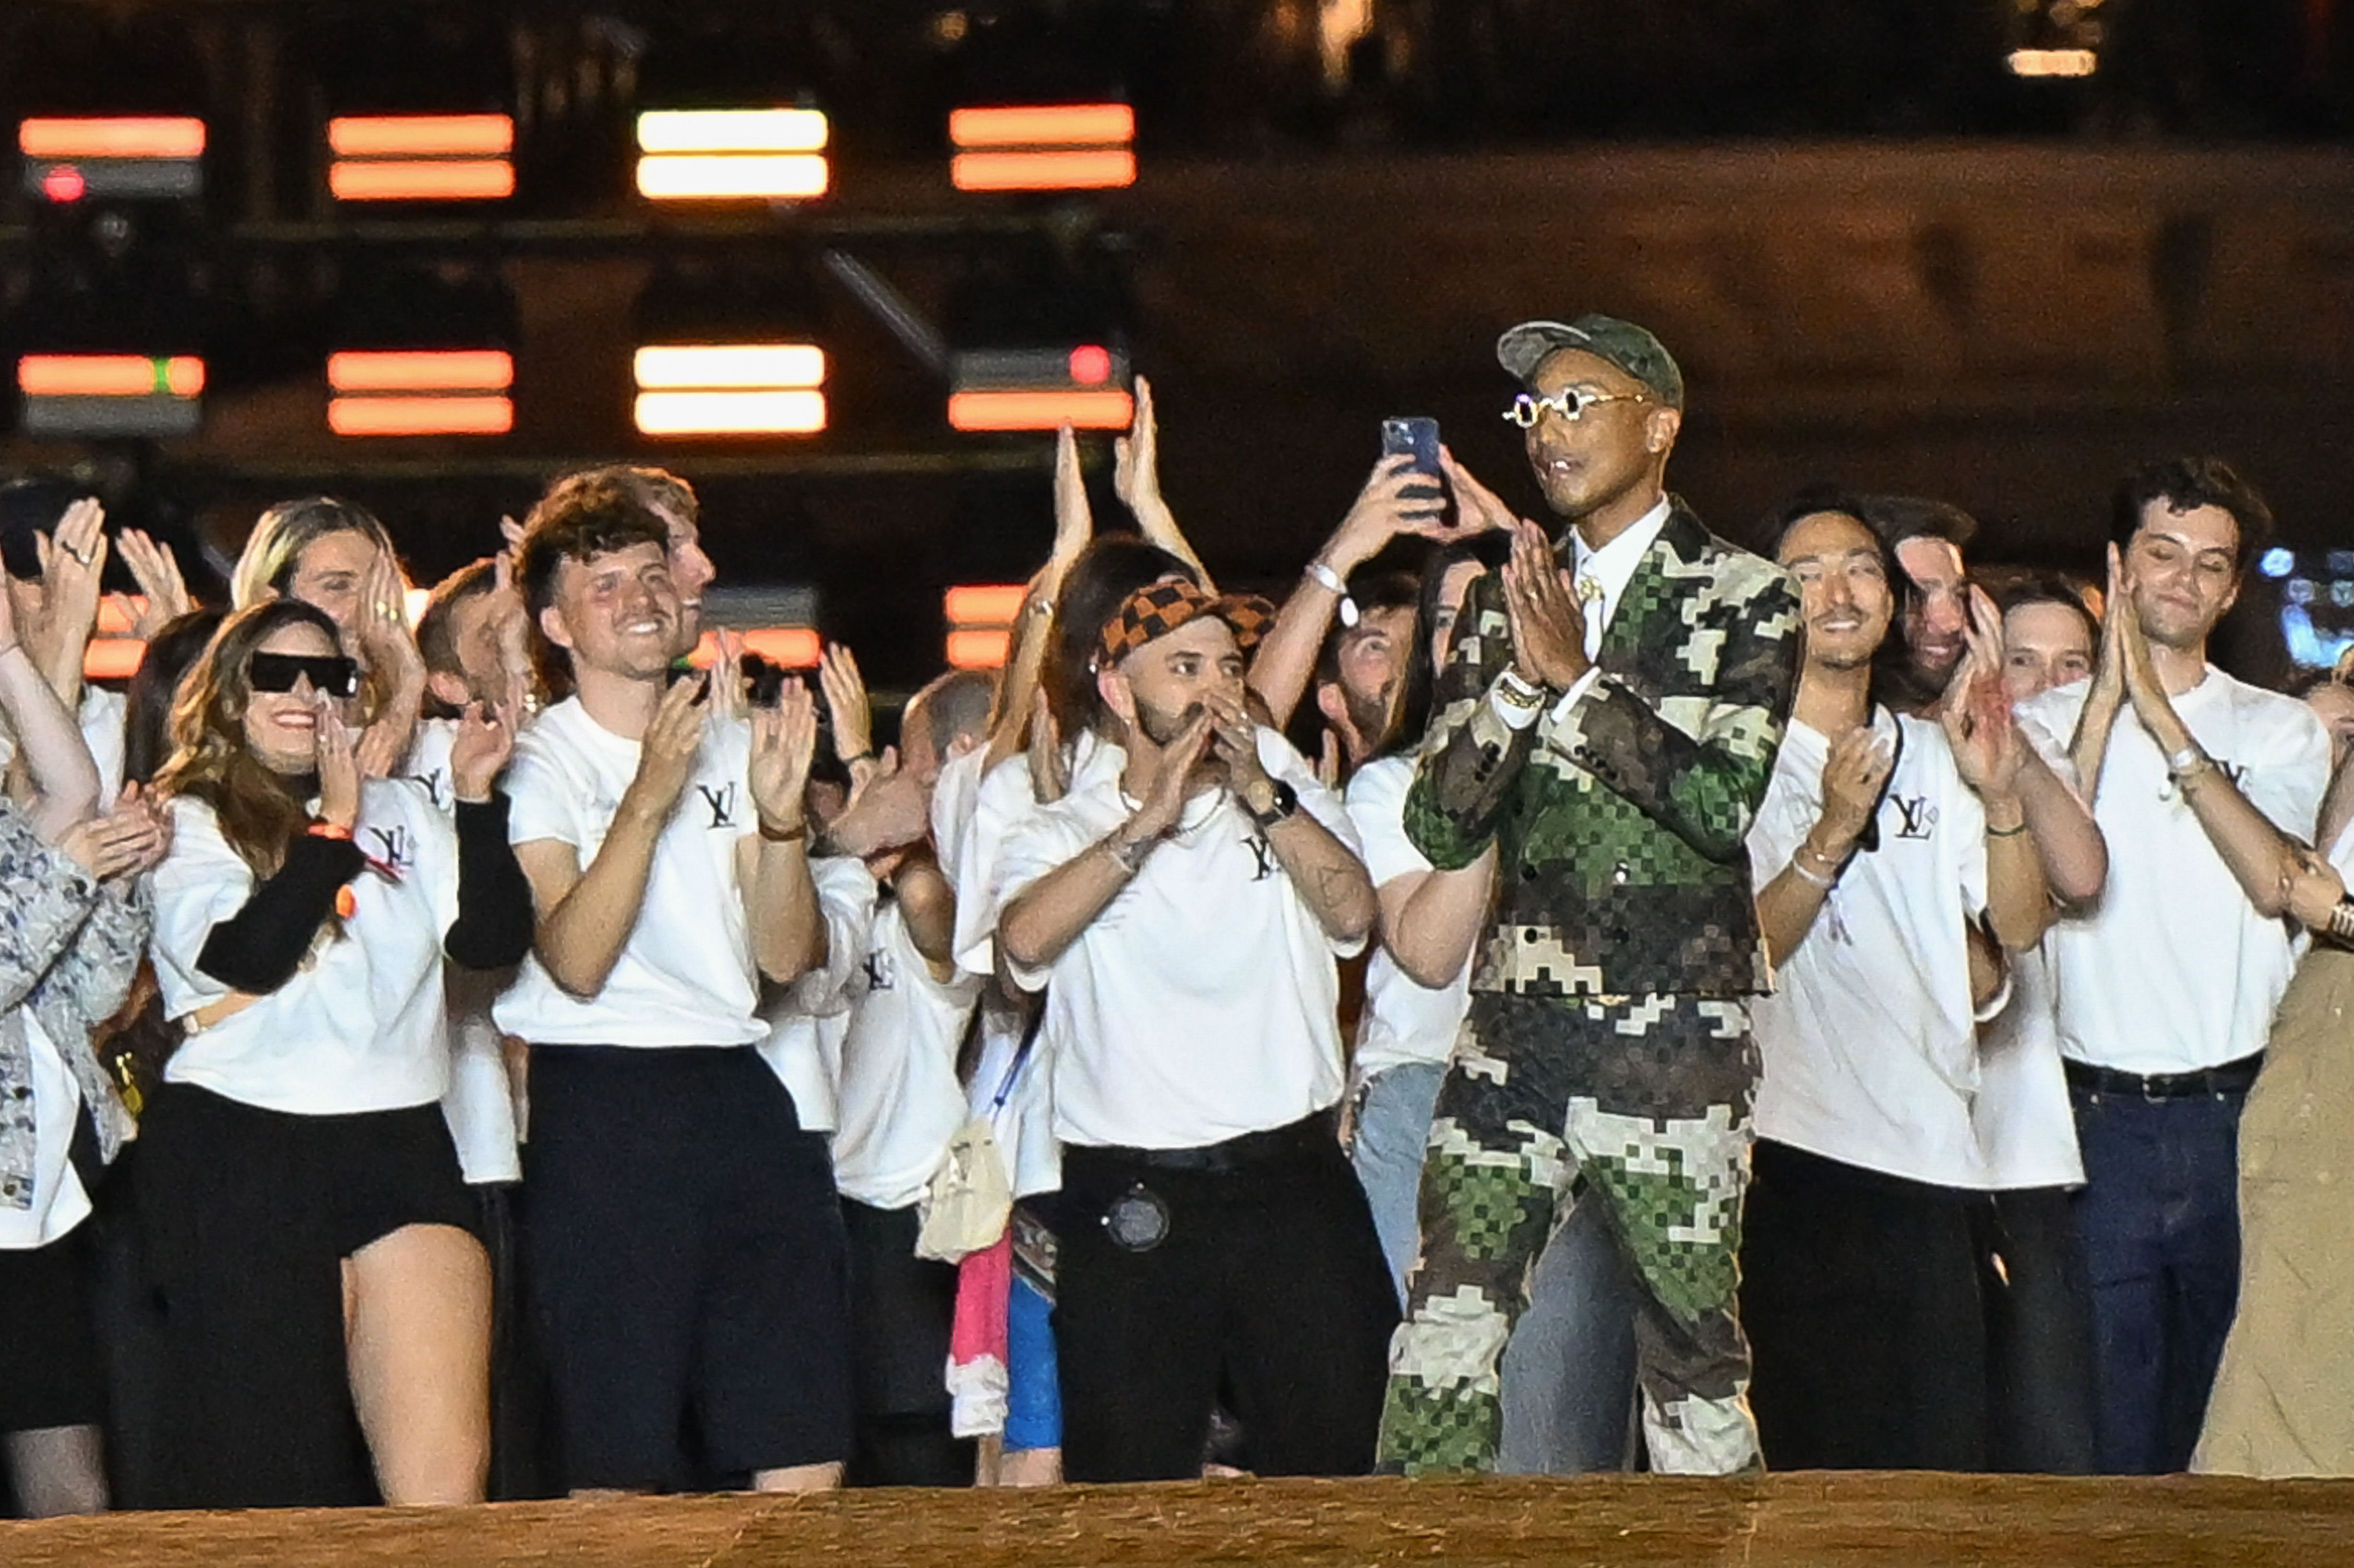 Pharrell Williams' First Louis Vuitton Show Was The Luxury Watch Spotting  Event Of The Year - DMARGE